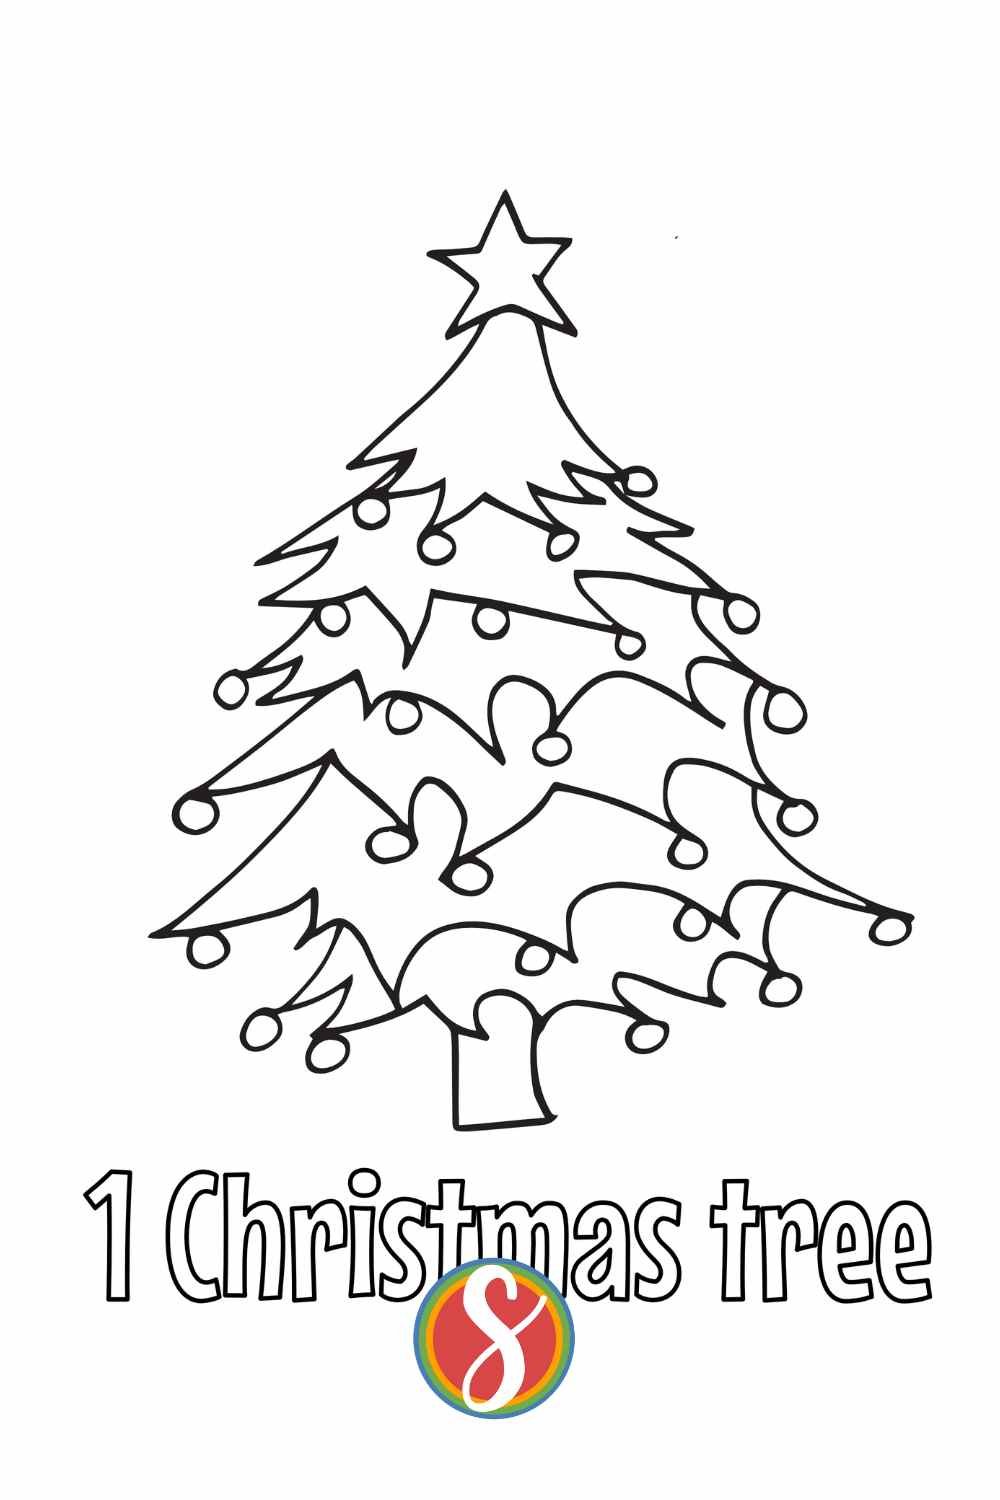 christmas tree to color with colorable text "1 christmas tree"